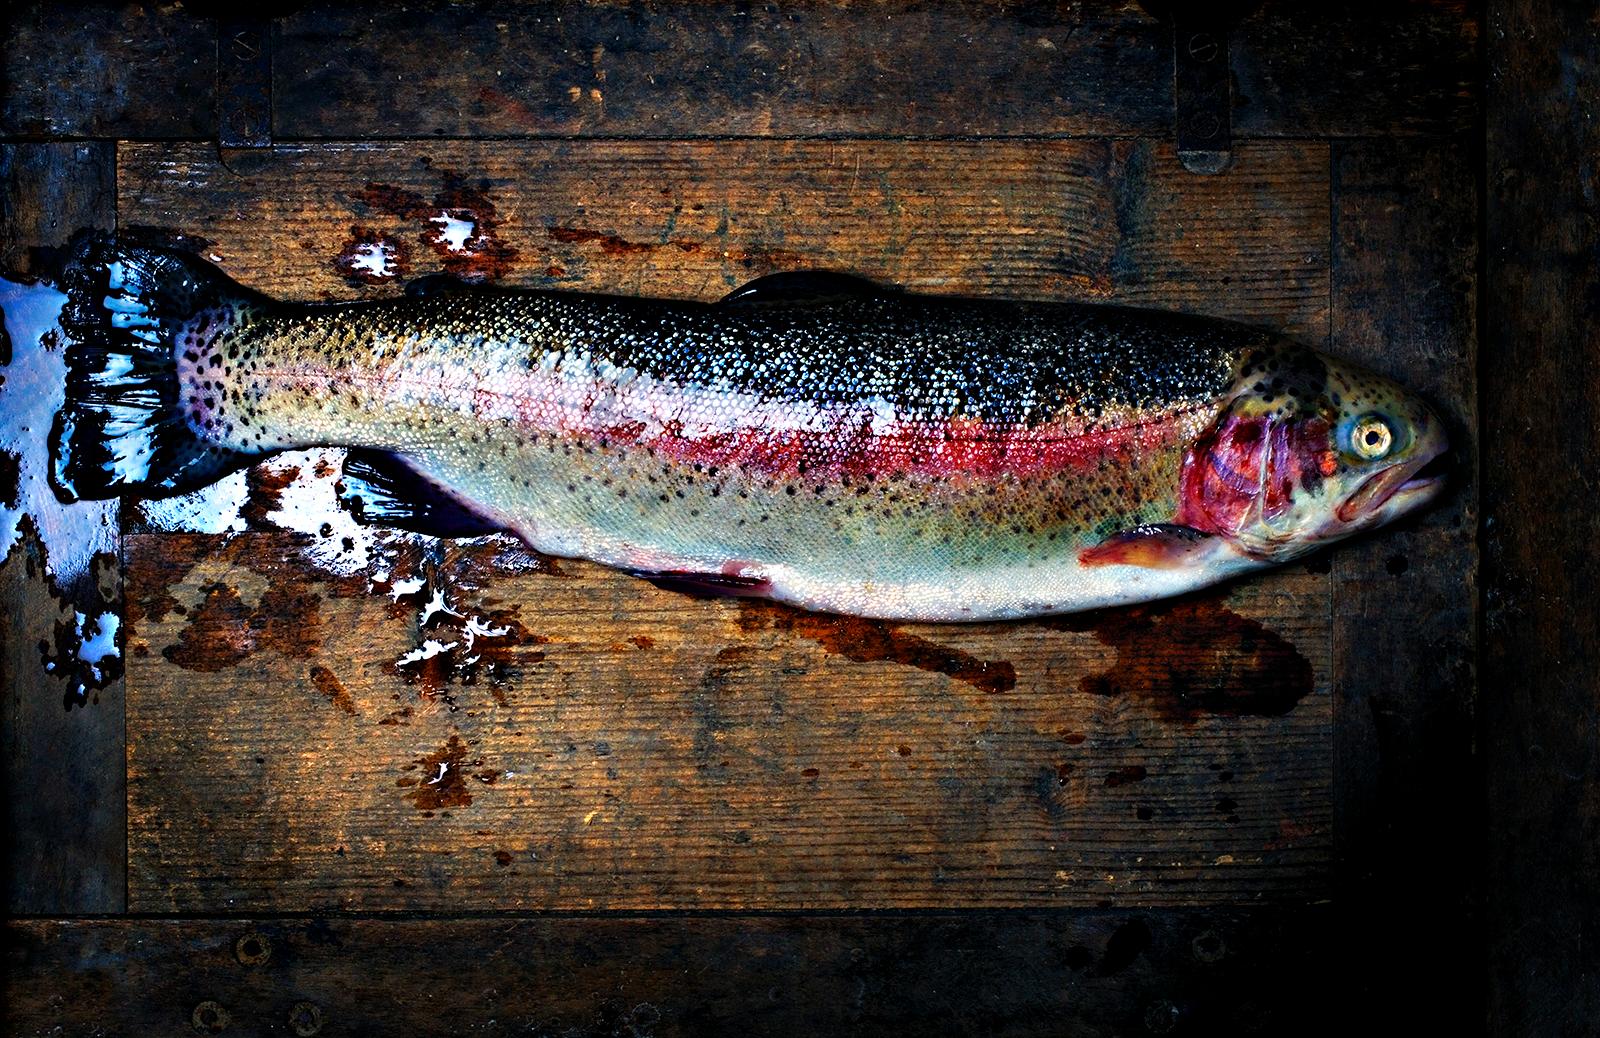 Ian Sanderson Still-Life Photograph - Trout - Signed limited edition fine art print, Color photography, Fish